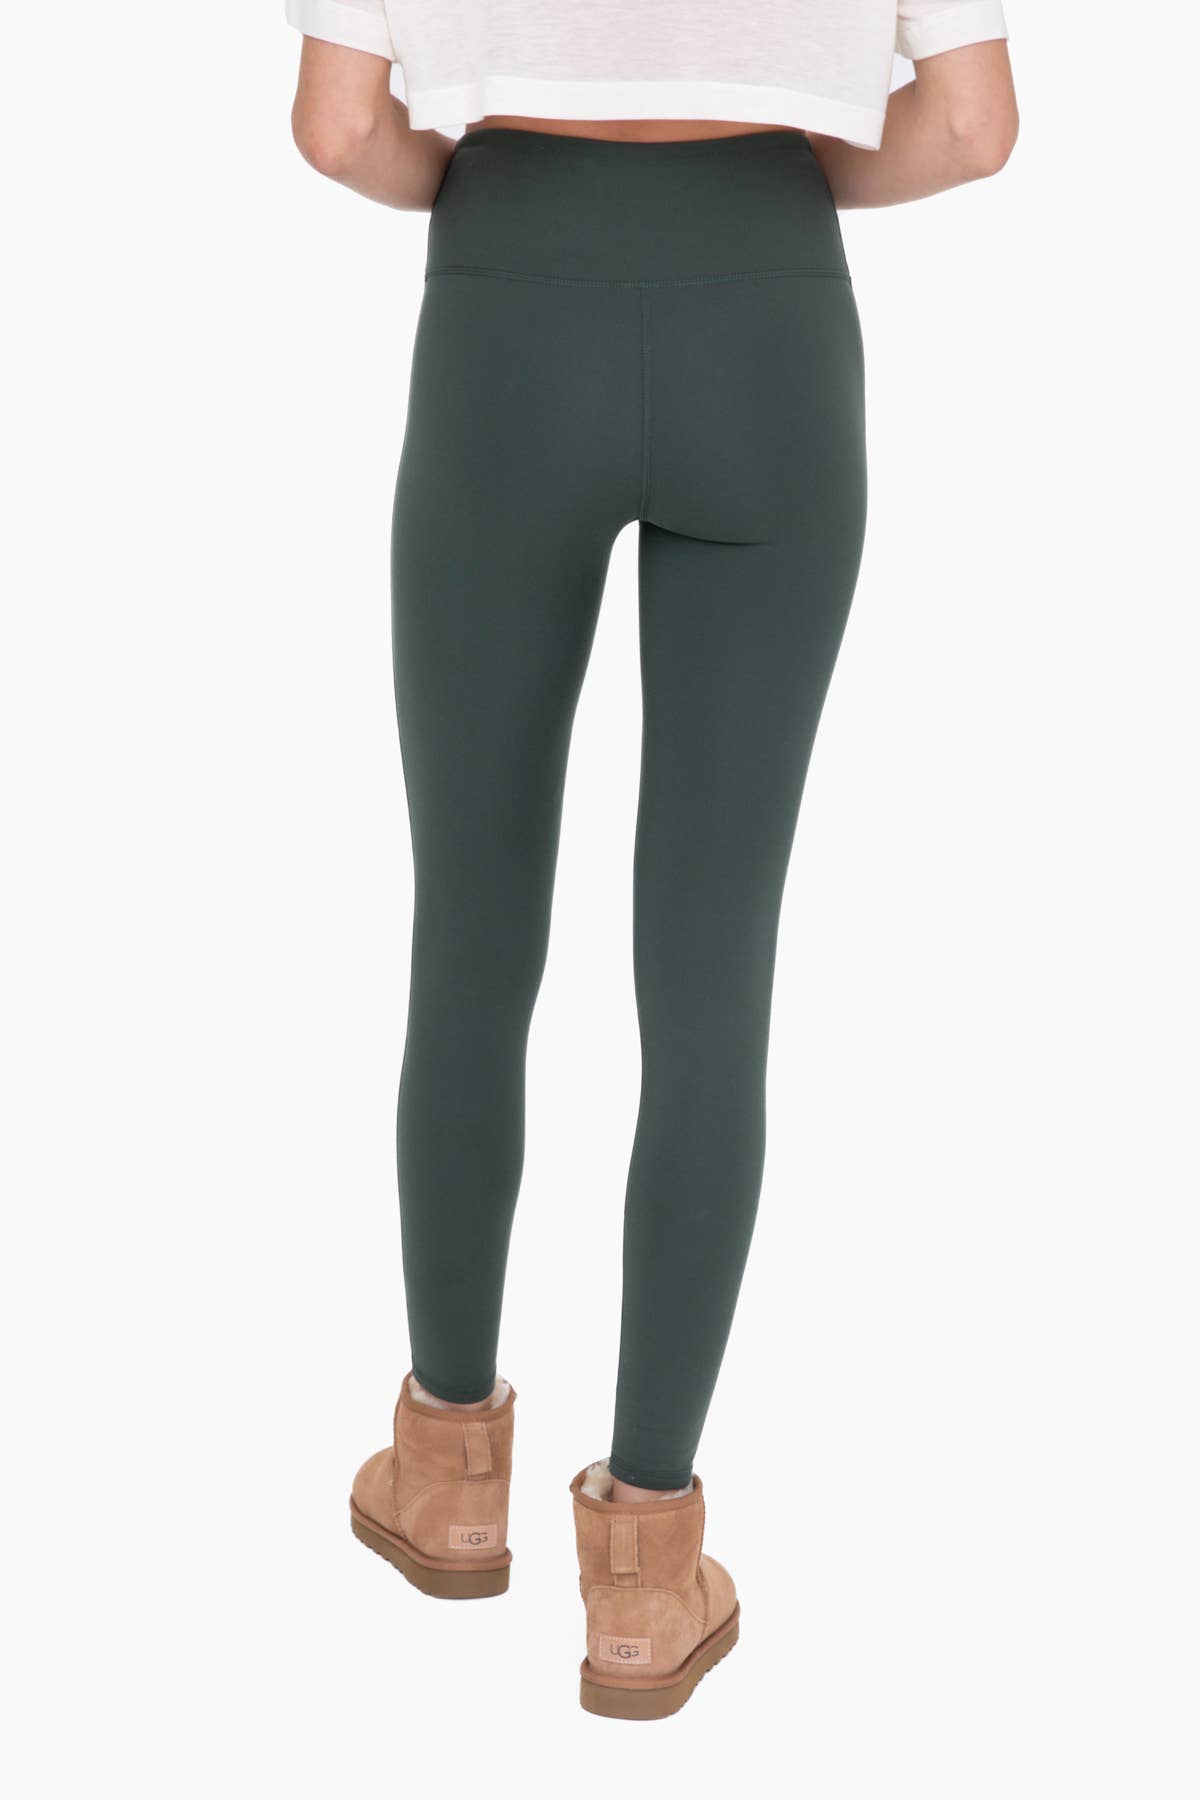 GREEN - Essential Solid Leggings: DEEP FOREST Core Mono B